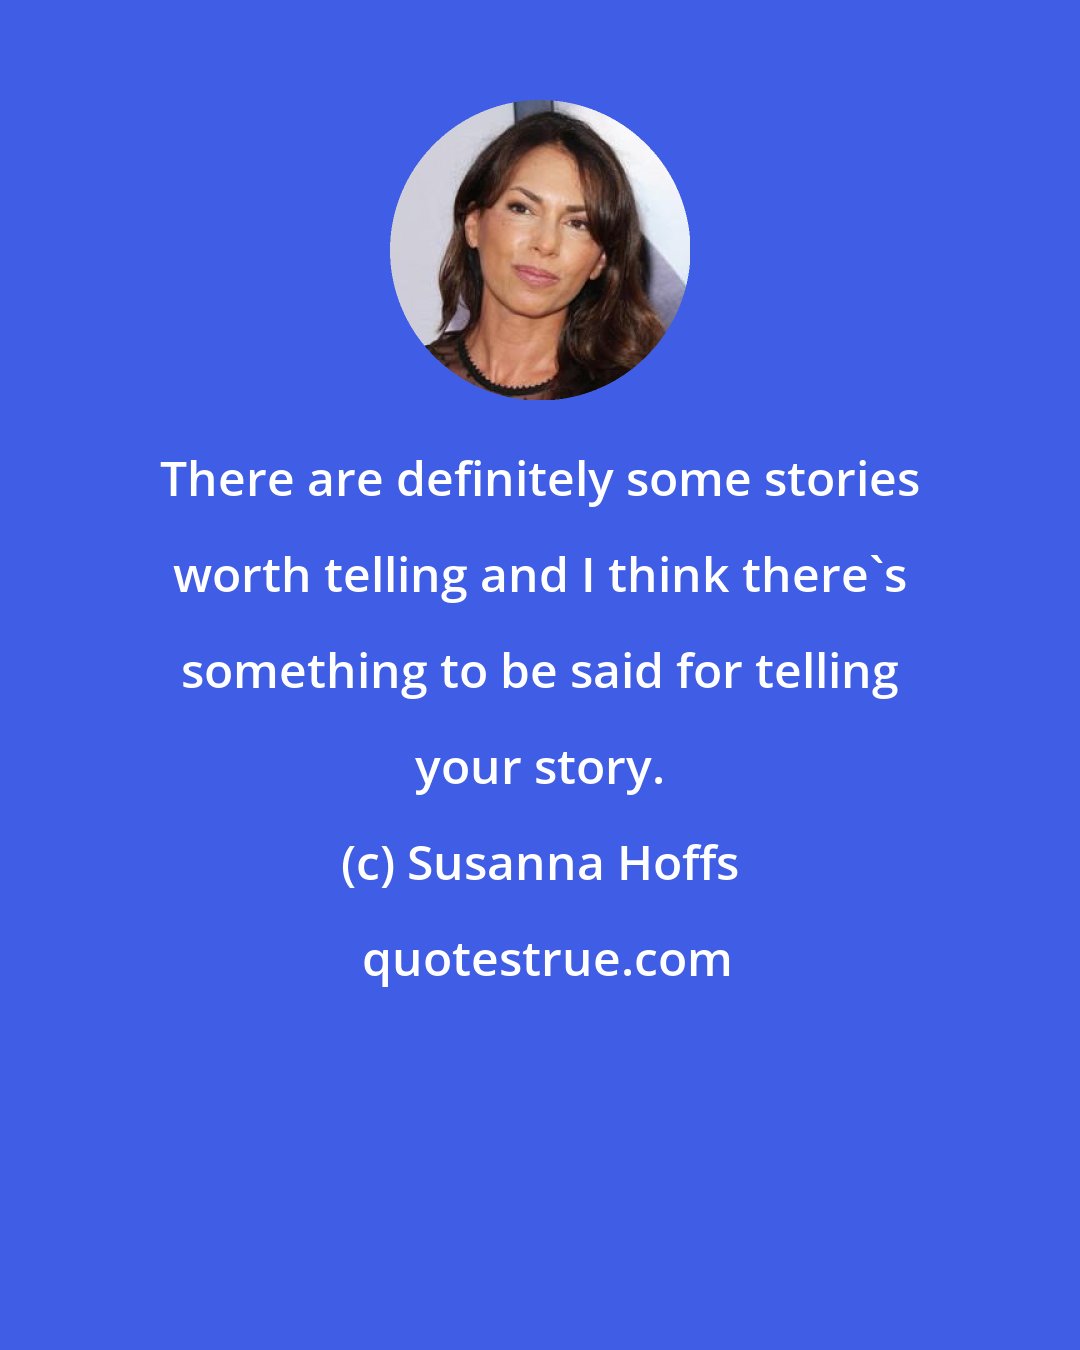 Susanna Hoffs: There are definitely some stories worth telling and I think there's something to be said for telling your story.